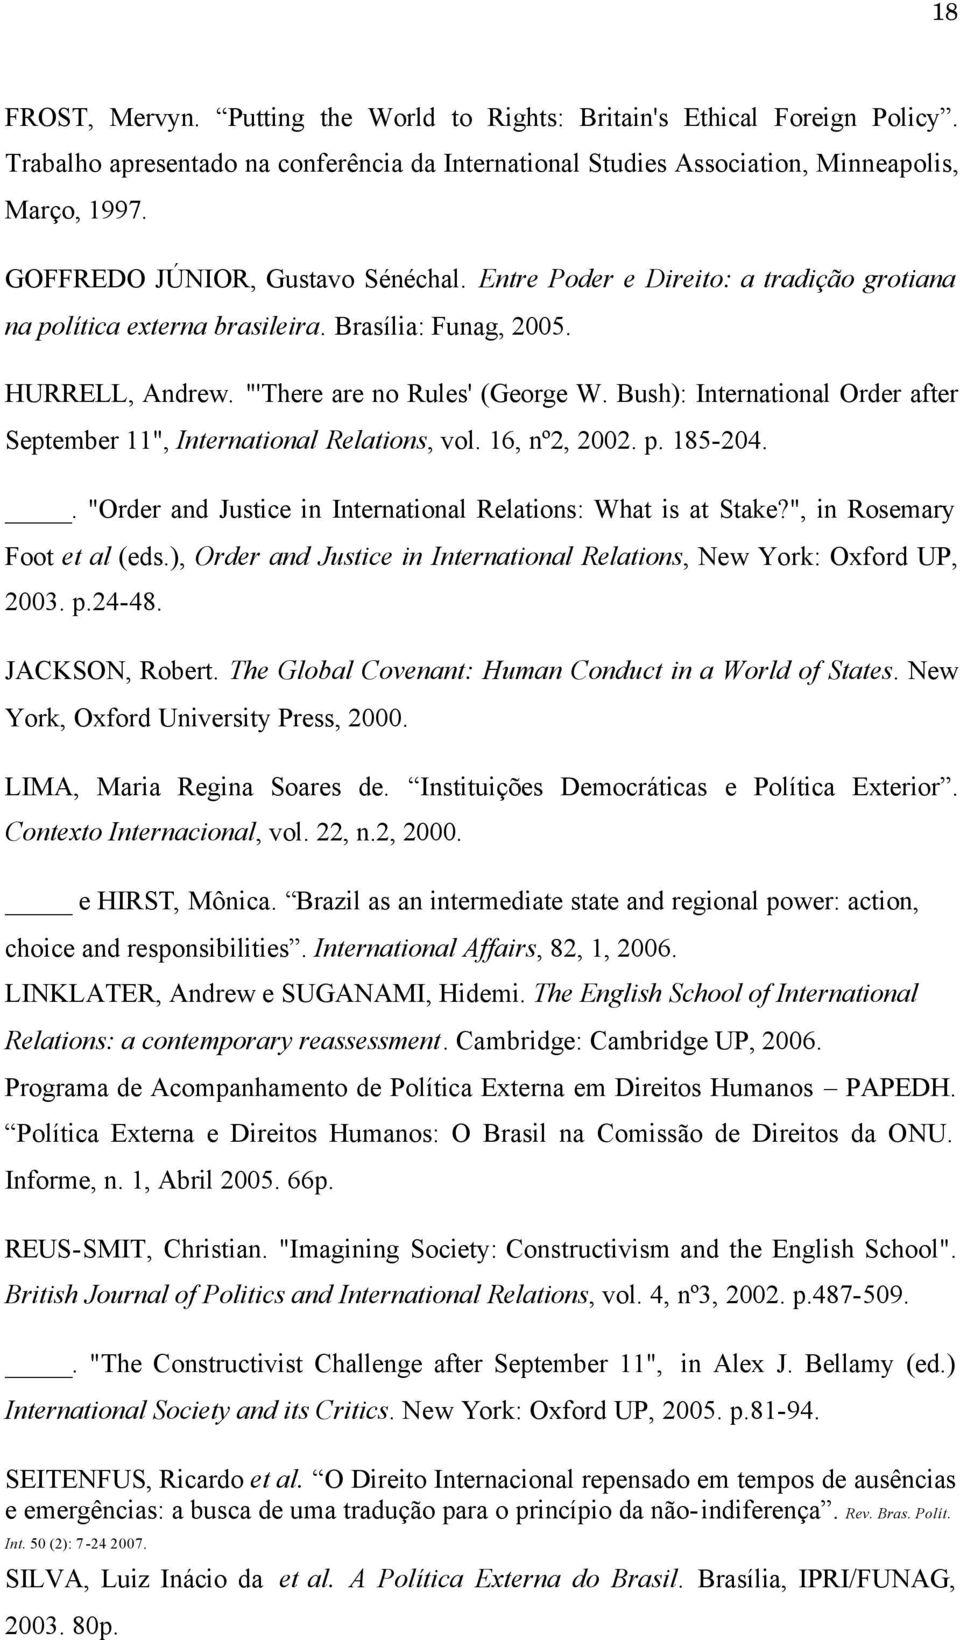 Bush): International Order after September 11", International Relations, vol. 16, nº2, 2002. p. 185-204.. "Order and Justice in International Relations: What is at Stake?